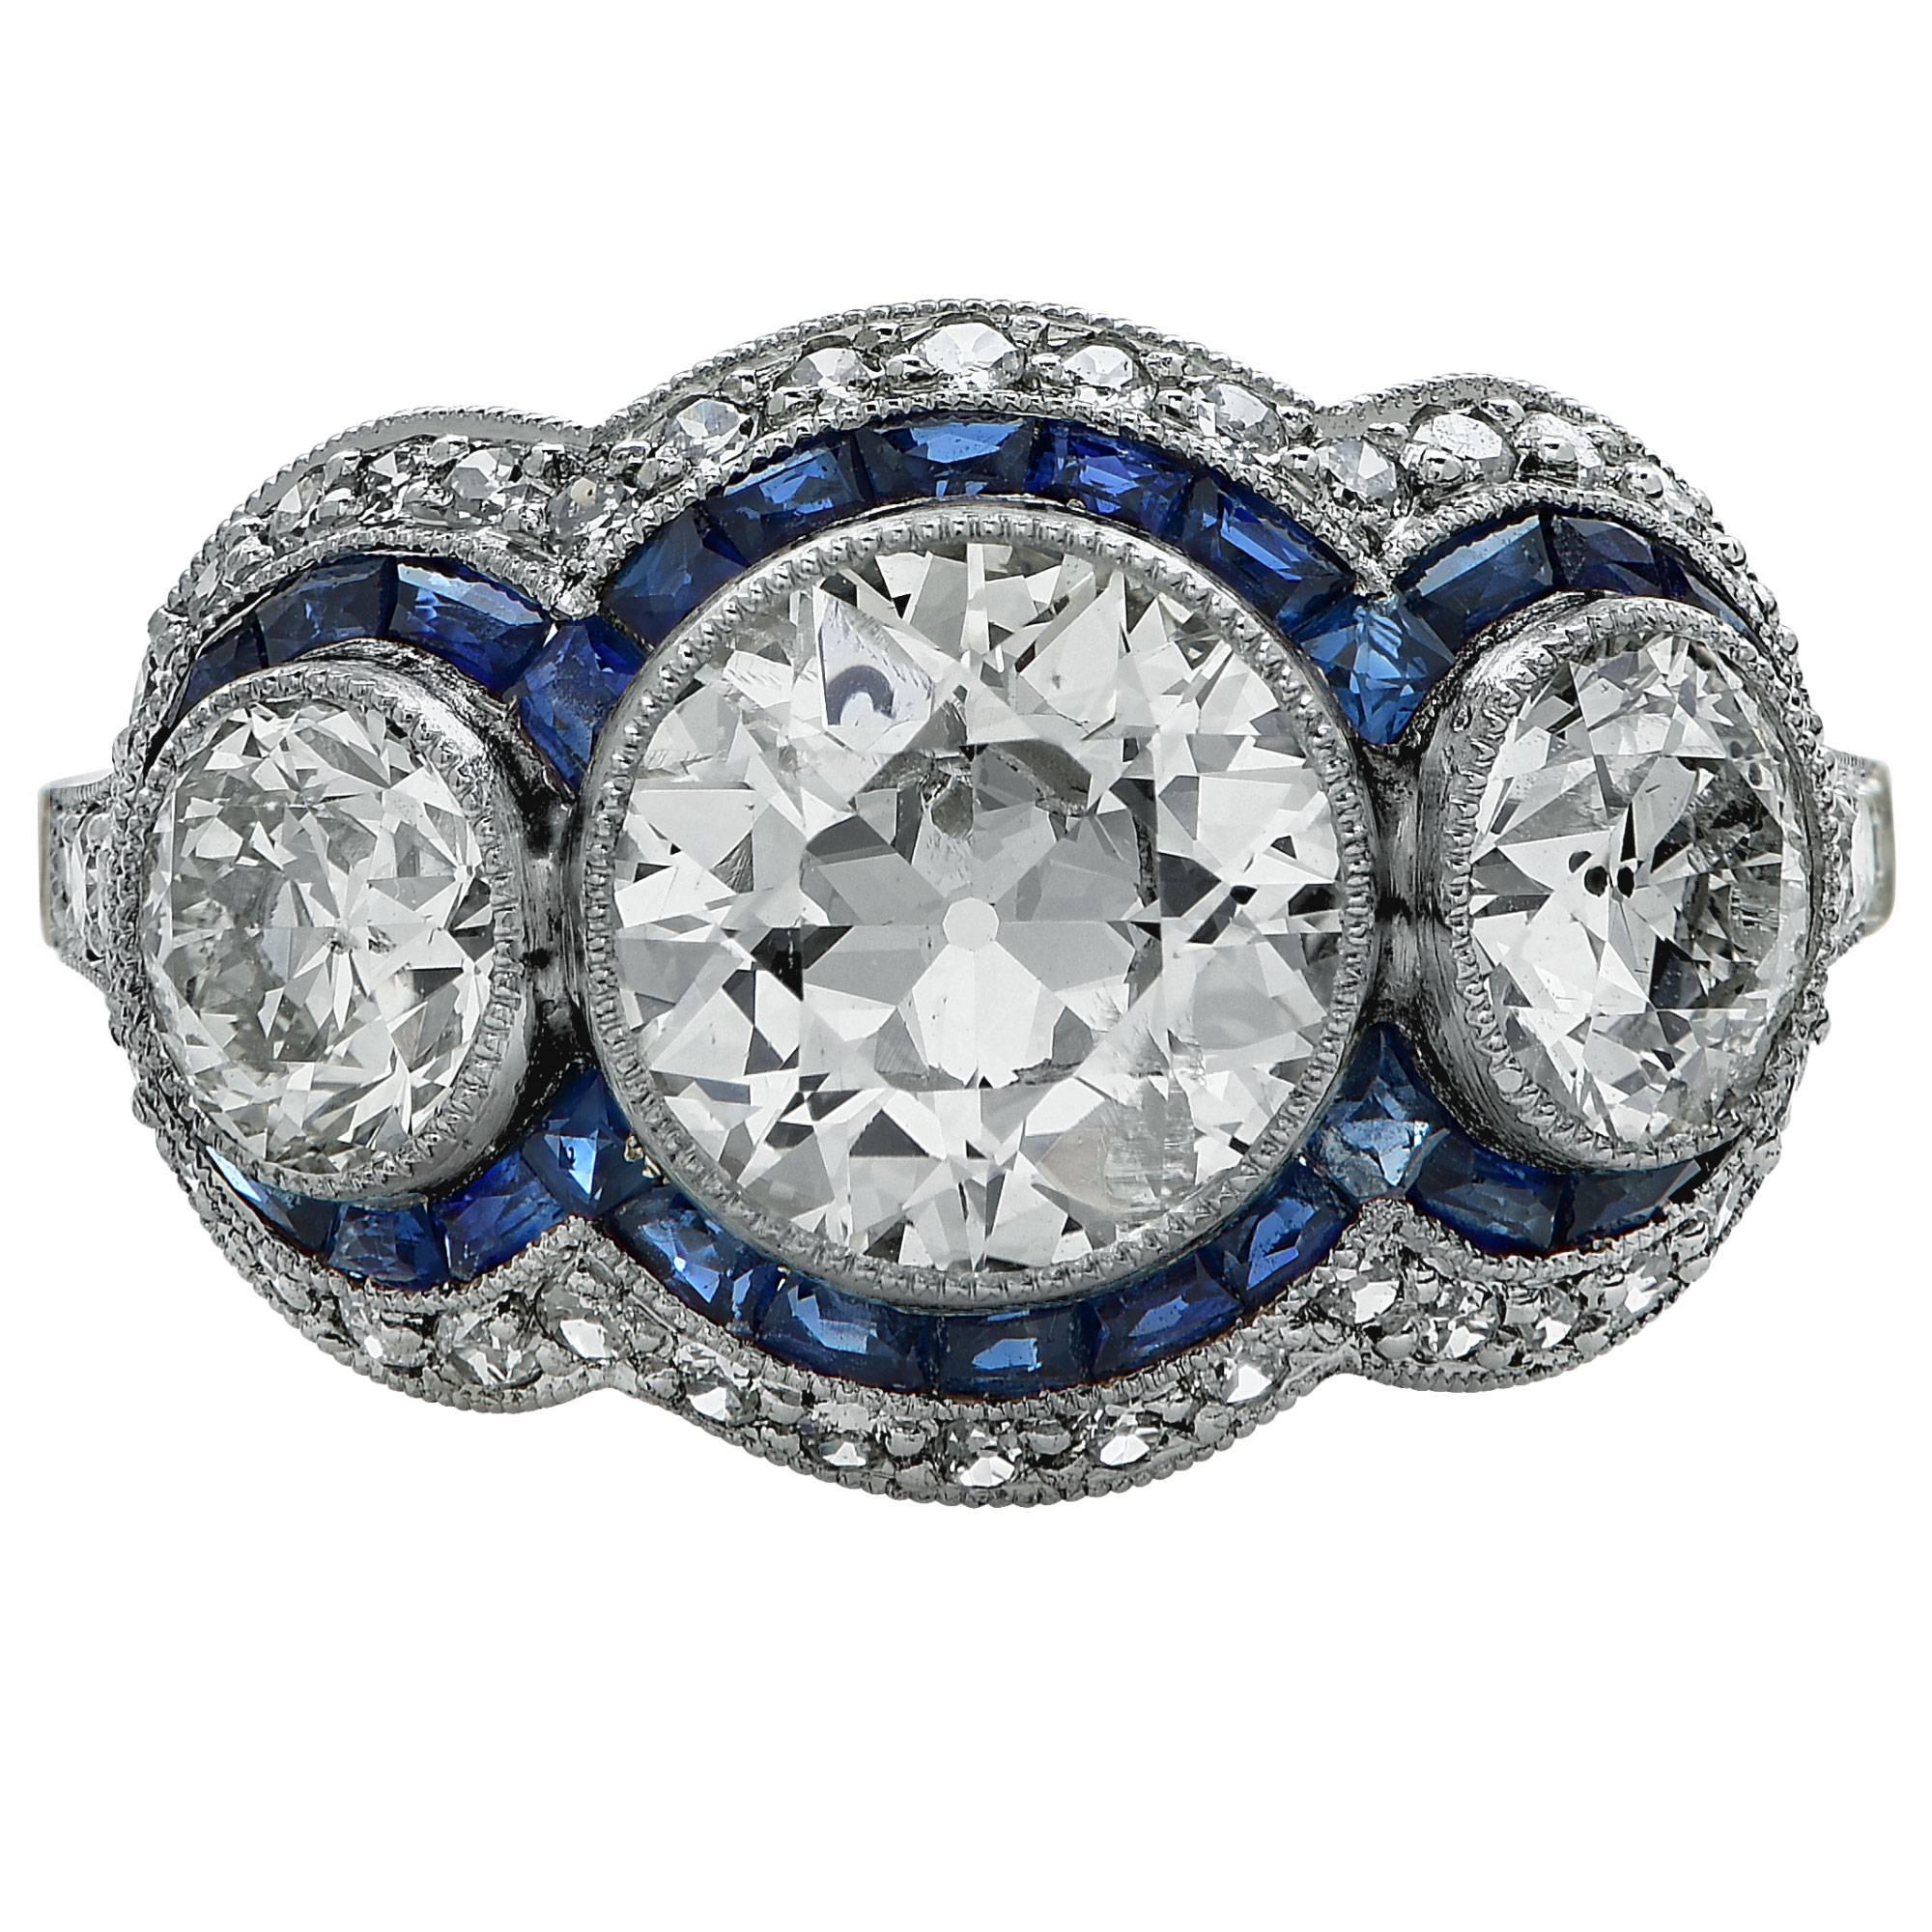 Platinum handmade ring featuring a European cut diamond weighing approximately 1.15cts H color SI clarity flanked by 2 European cut diamonds weighing approximately 1.40cts total, H color VS clarity accented by approximately .45cts of European cut